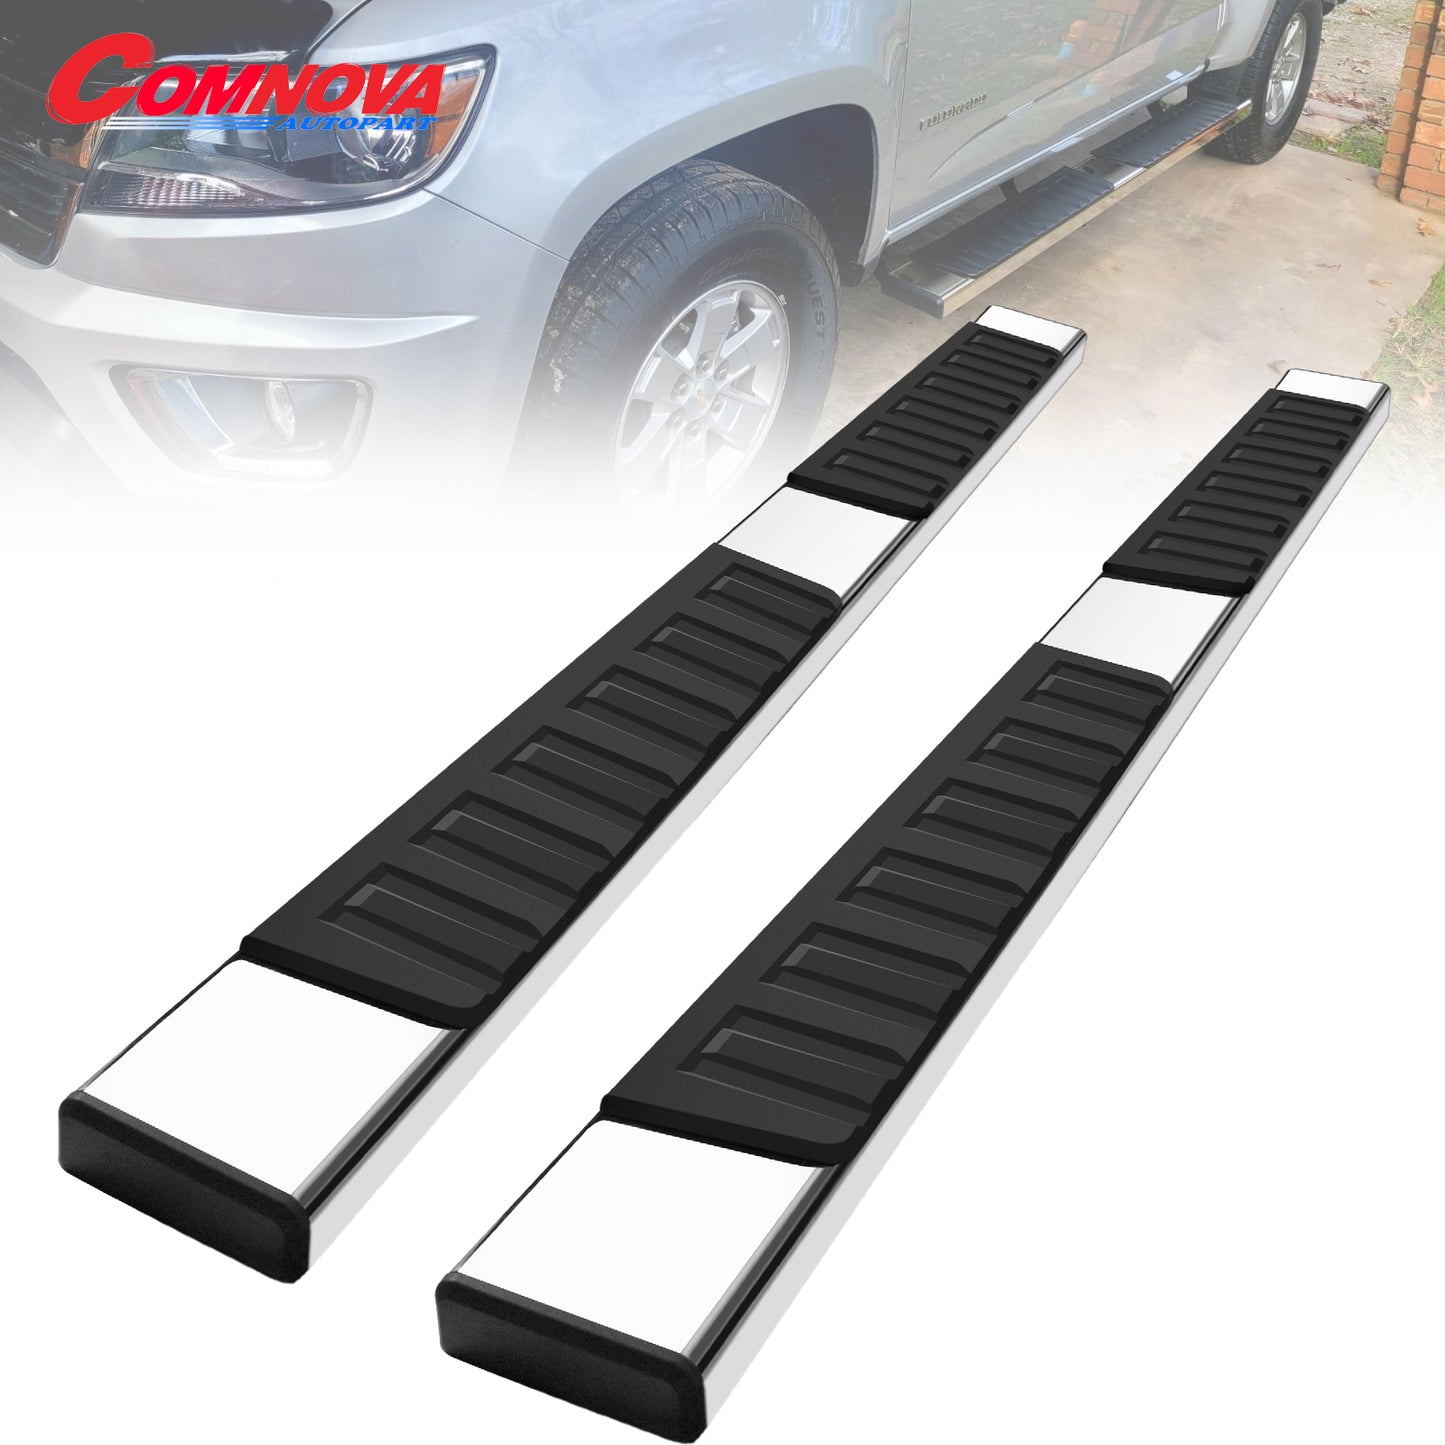 Running Boards Compatible with 2019-2024 Ford Ranger Super Crew Cab with 4 Full Size Doors, Stainless Steel Side Steps H6 Style. - COMNOVA AUTOPART